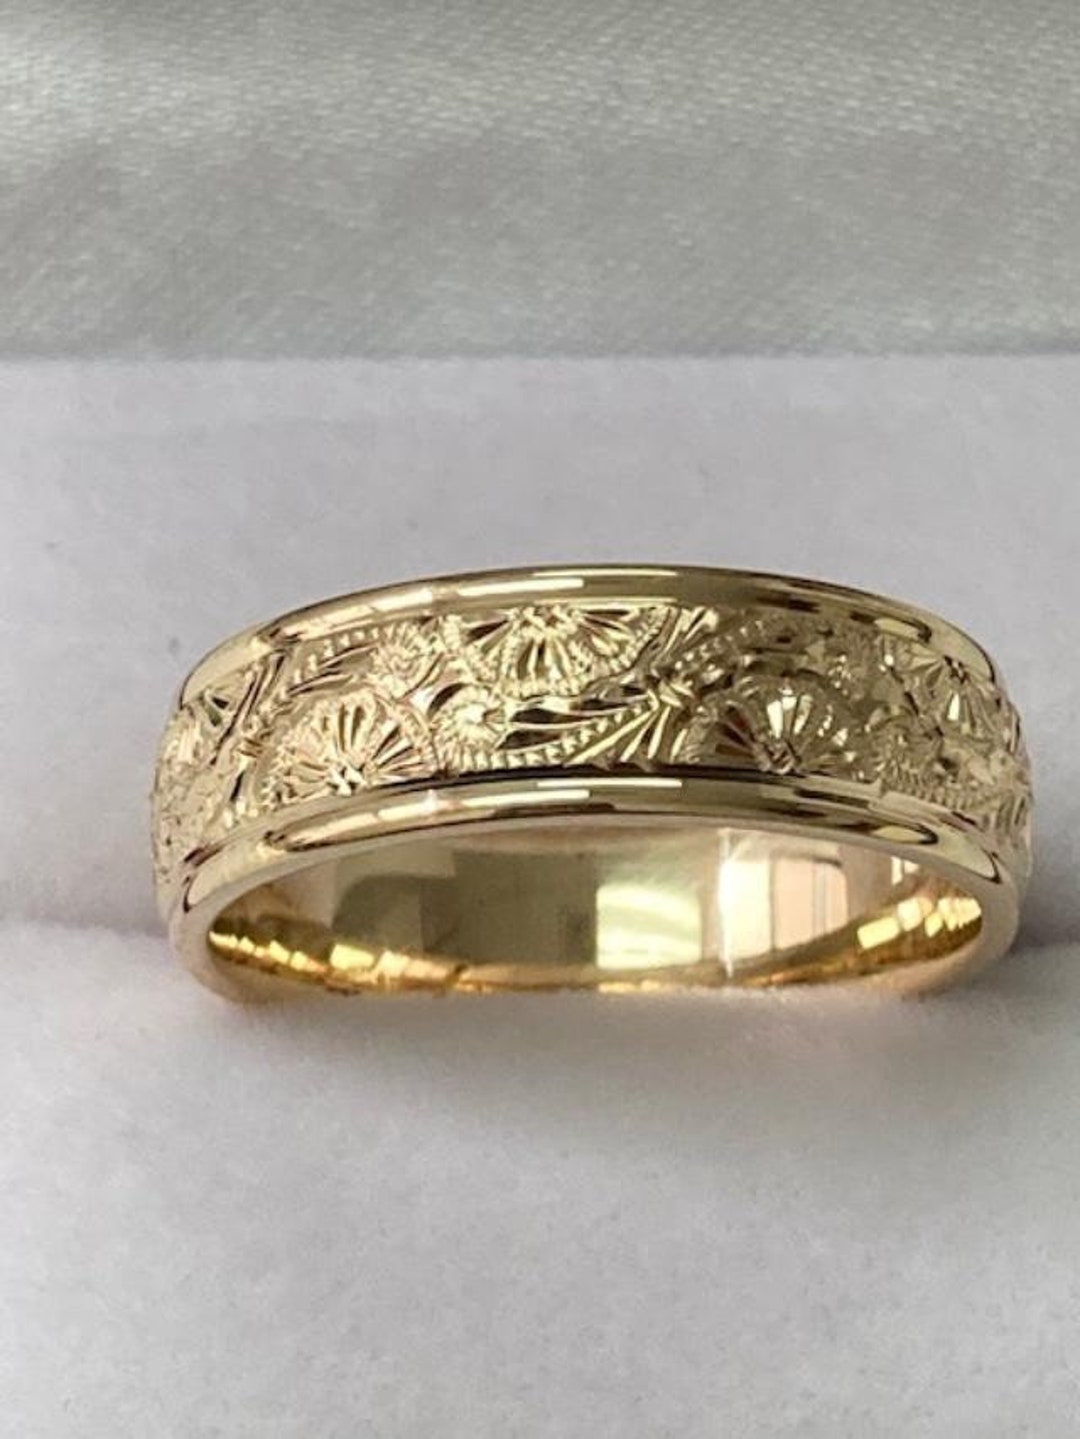 6mm 10K 14K 18K Solid Yellow Gold Hand Engraved Mens Wedding Band